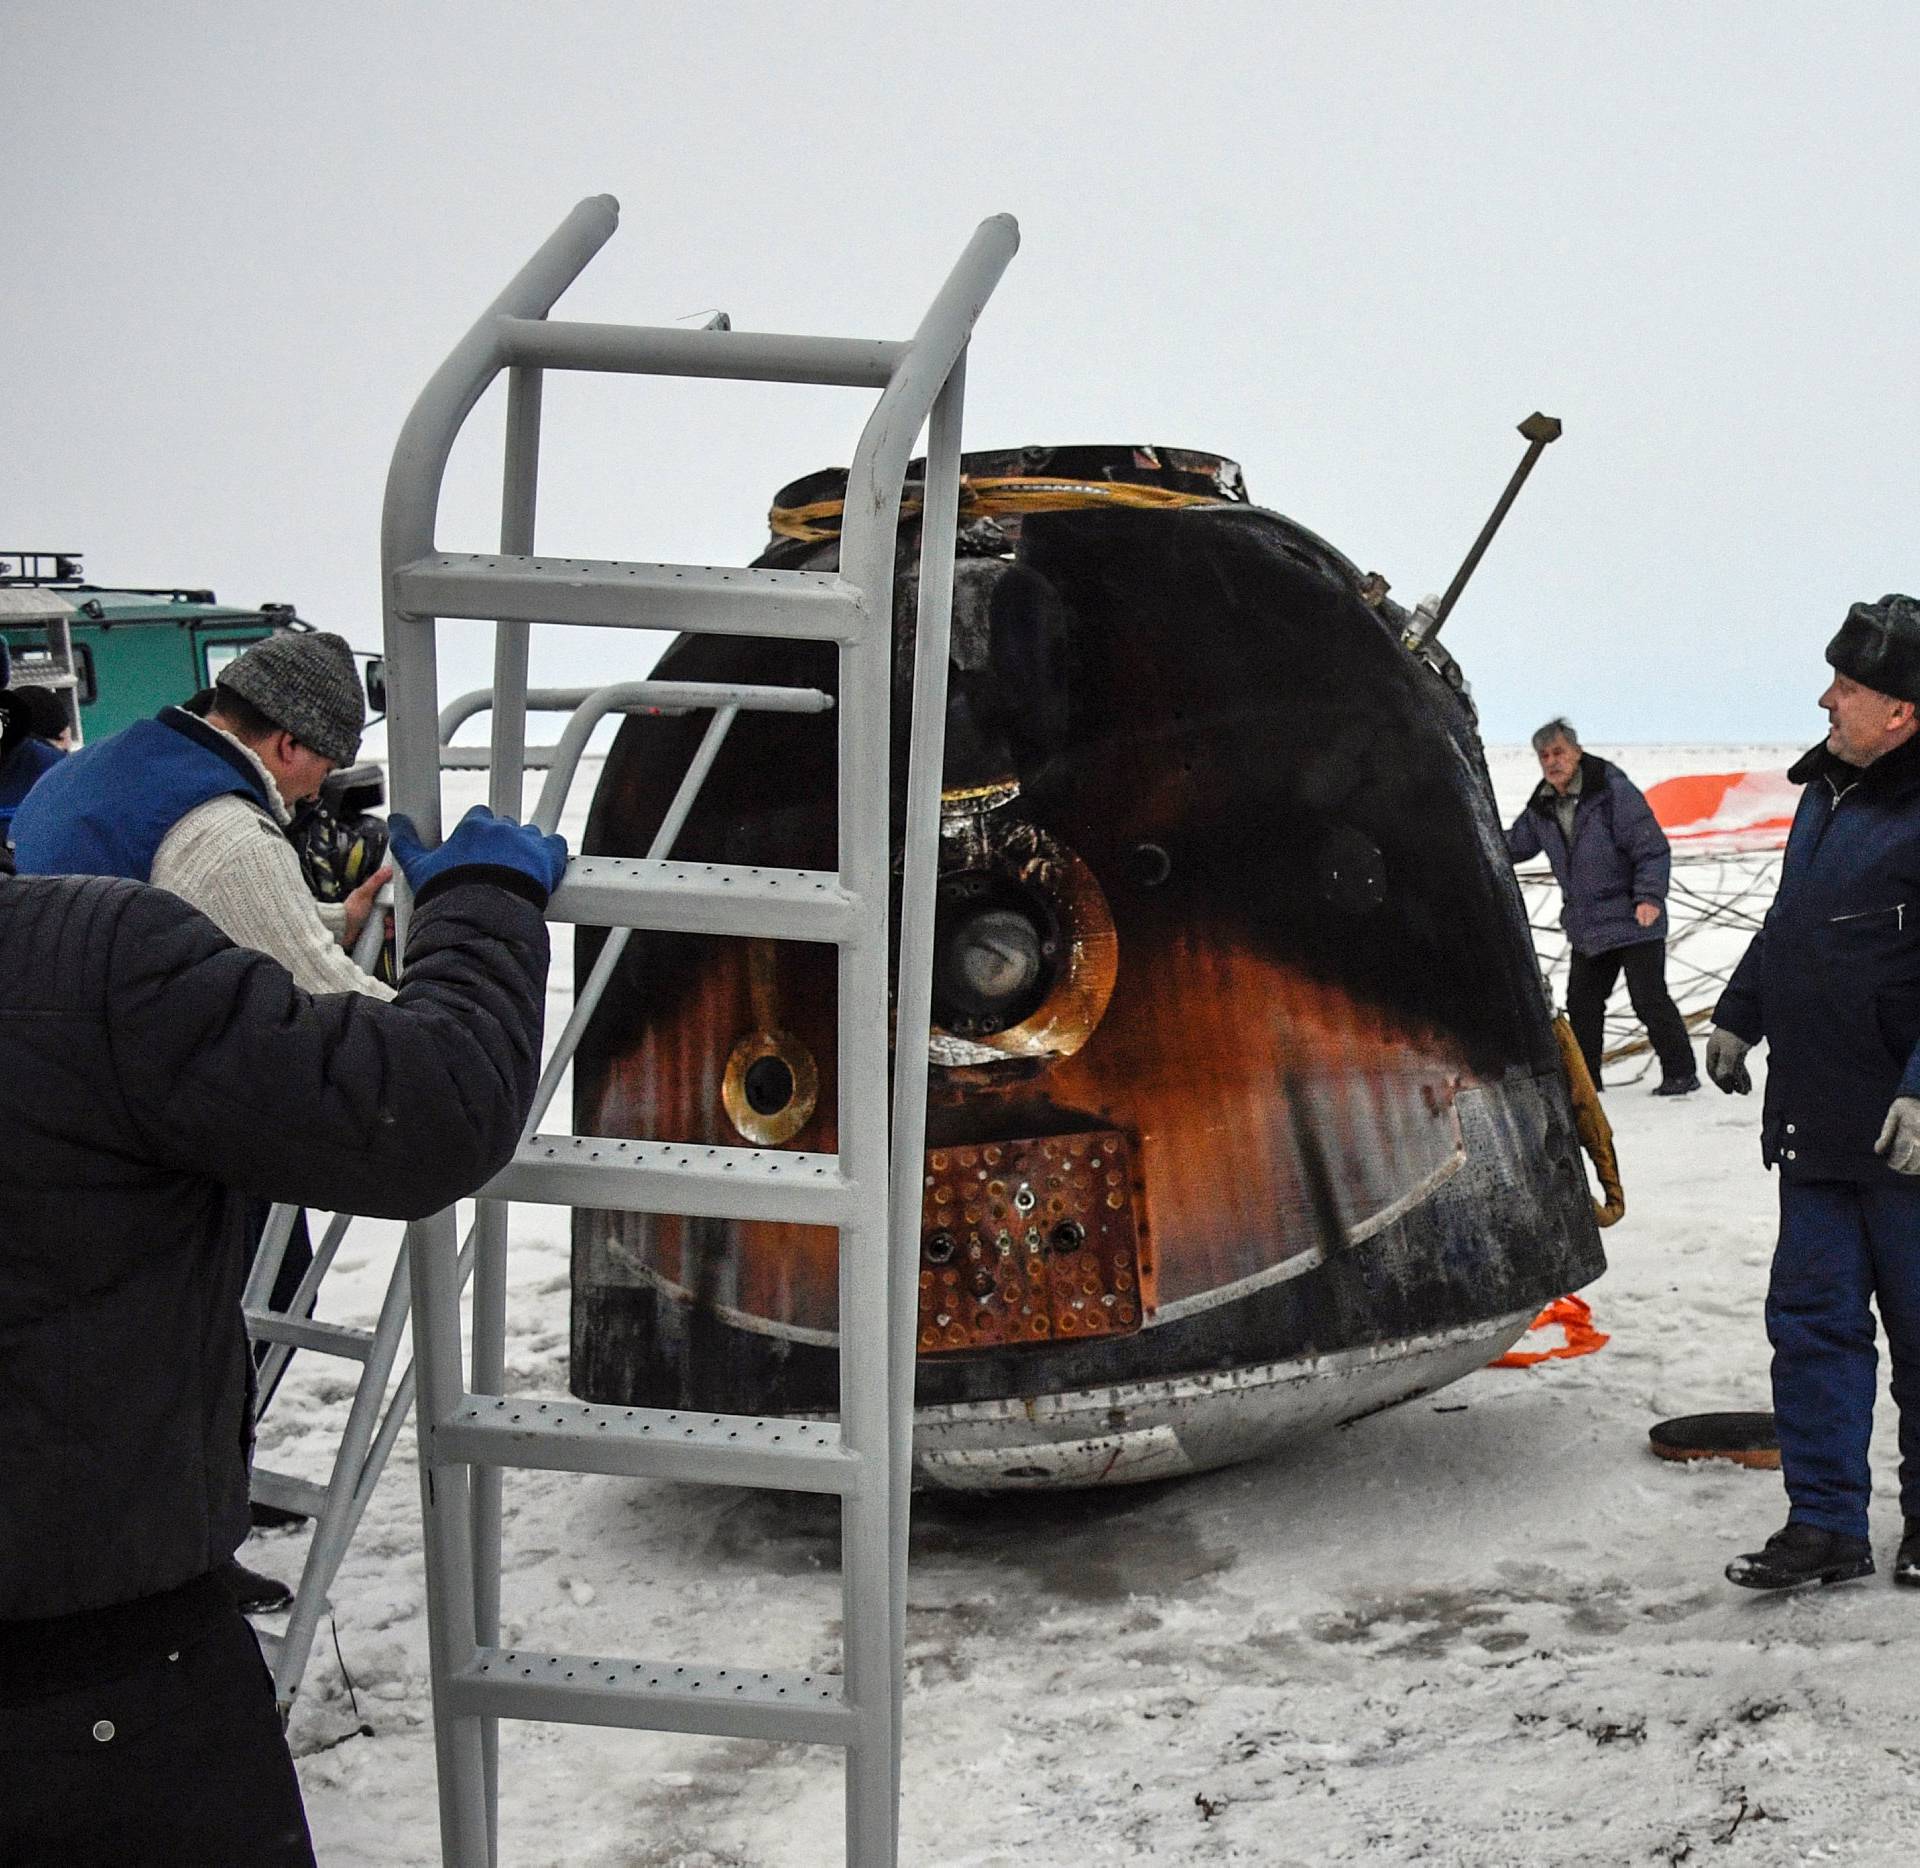 A Search and rescue team works at the landing site of the Soyuz MS-06 space capsule with International Space Station crew members, in a remote area outside the town of Dzhezkazgan